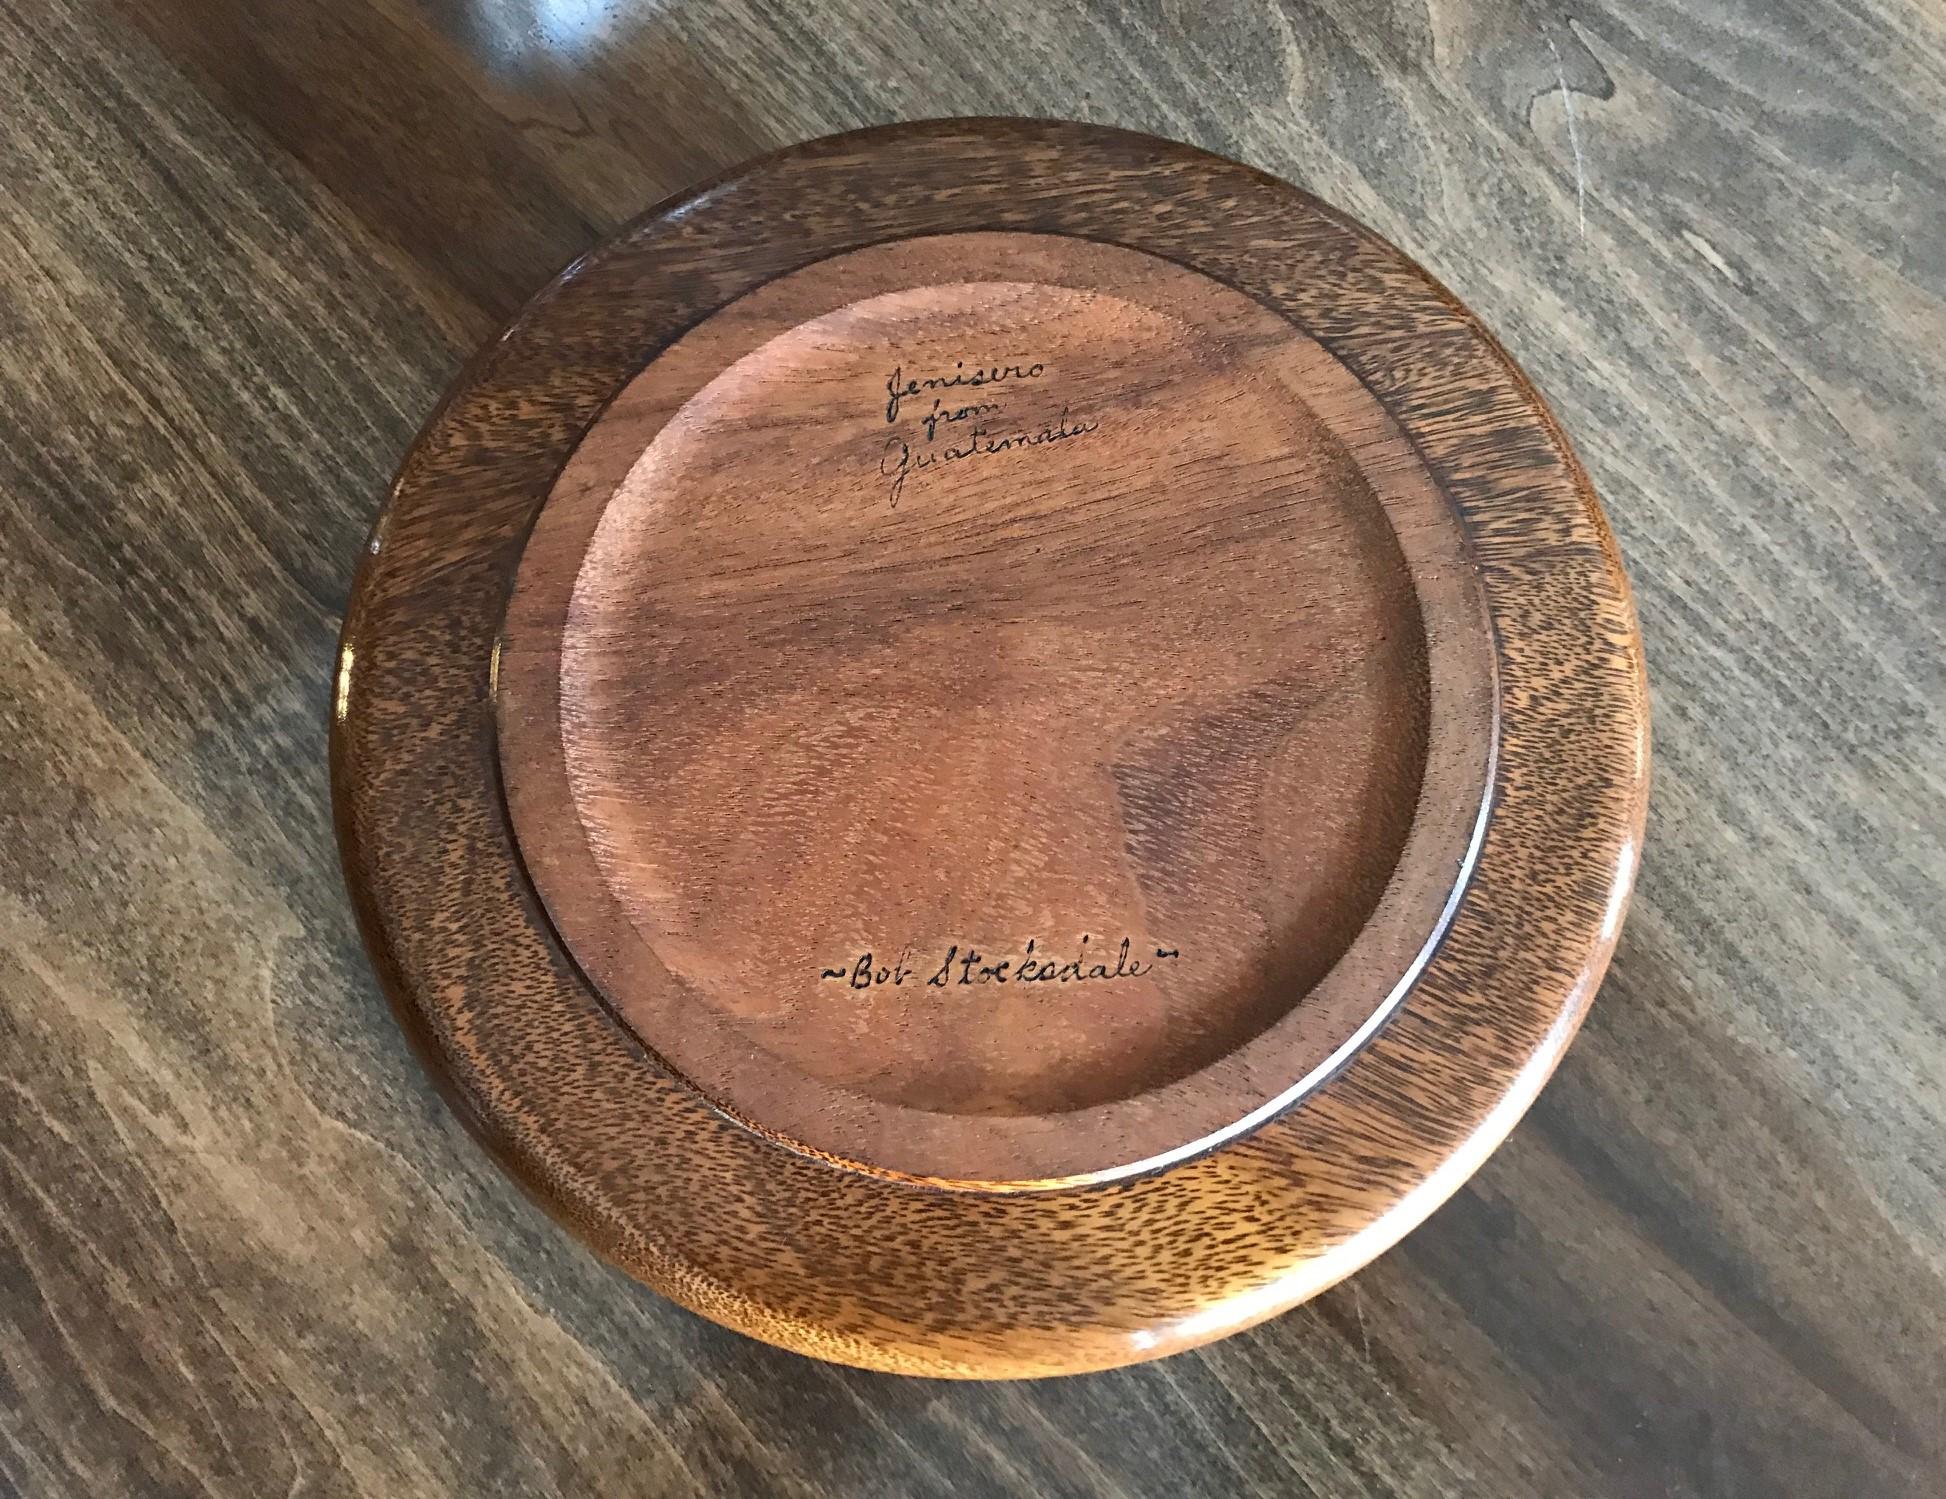 Bob Stocksdale Signed Mid-Century Modern Turned Exotic Wood Bowl Platter Plate In Good Condition For Sale In Studio City, CA